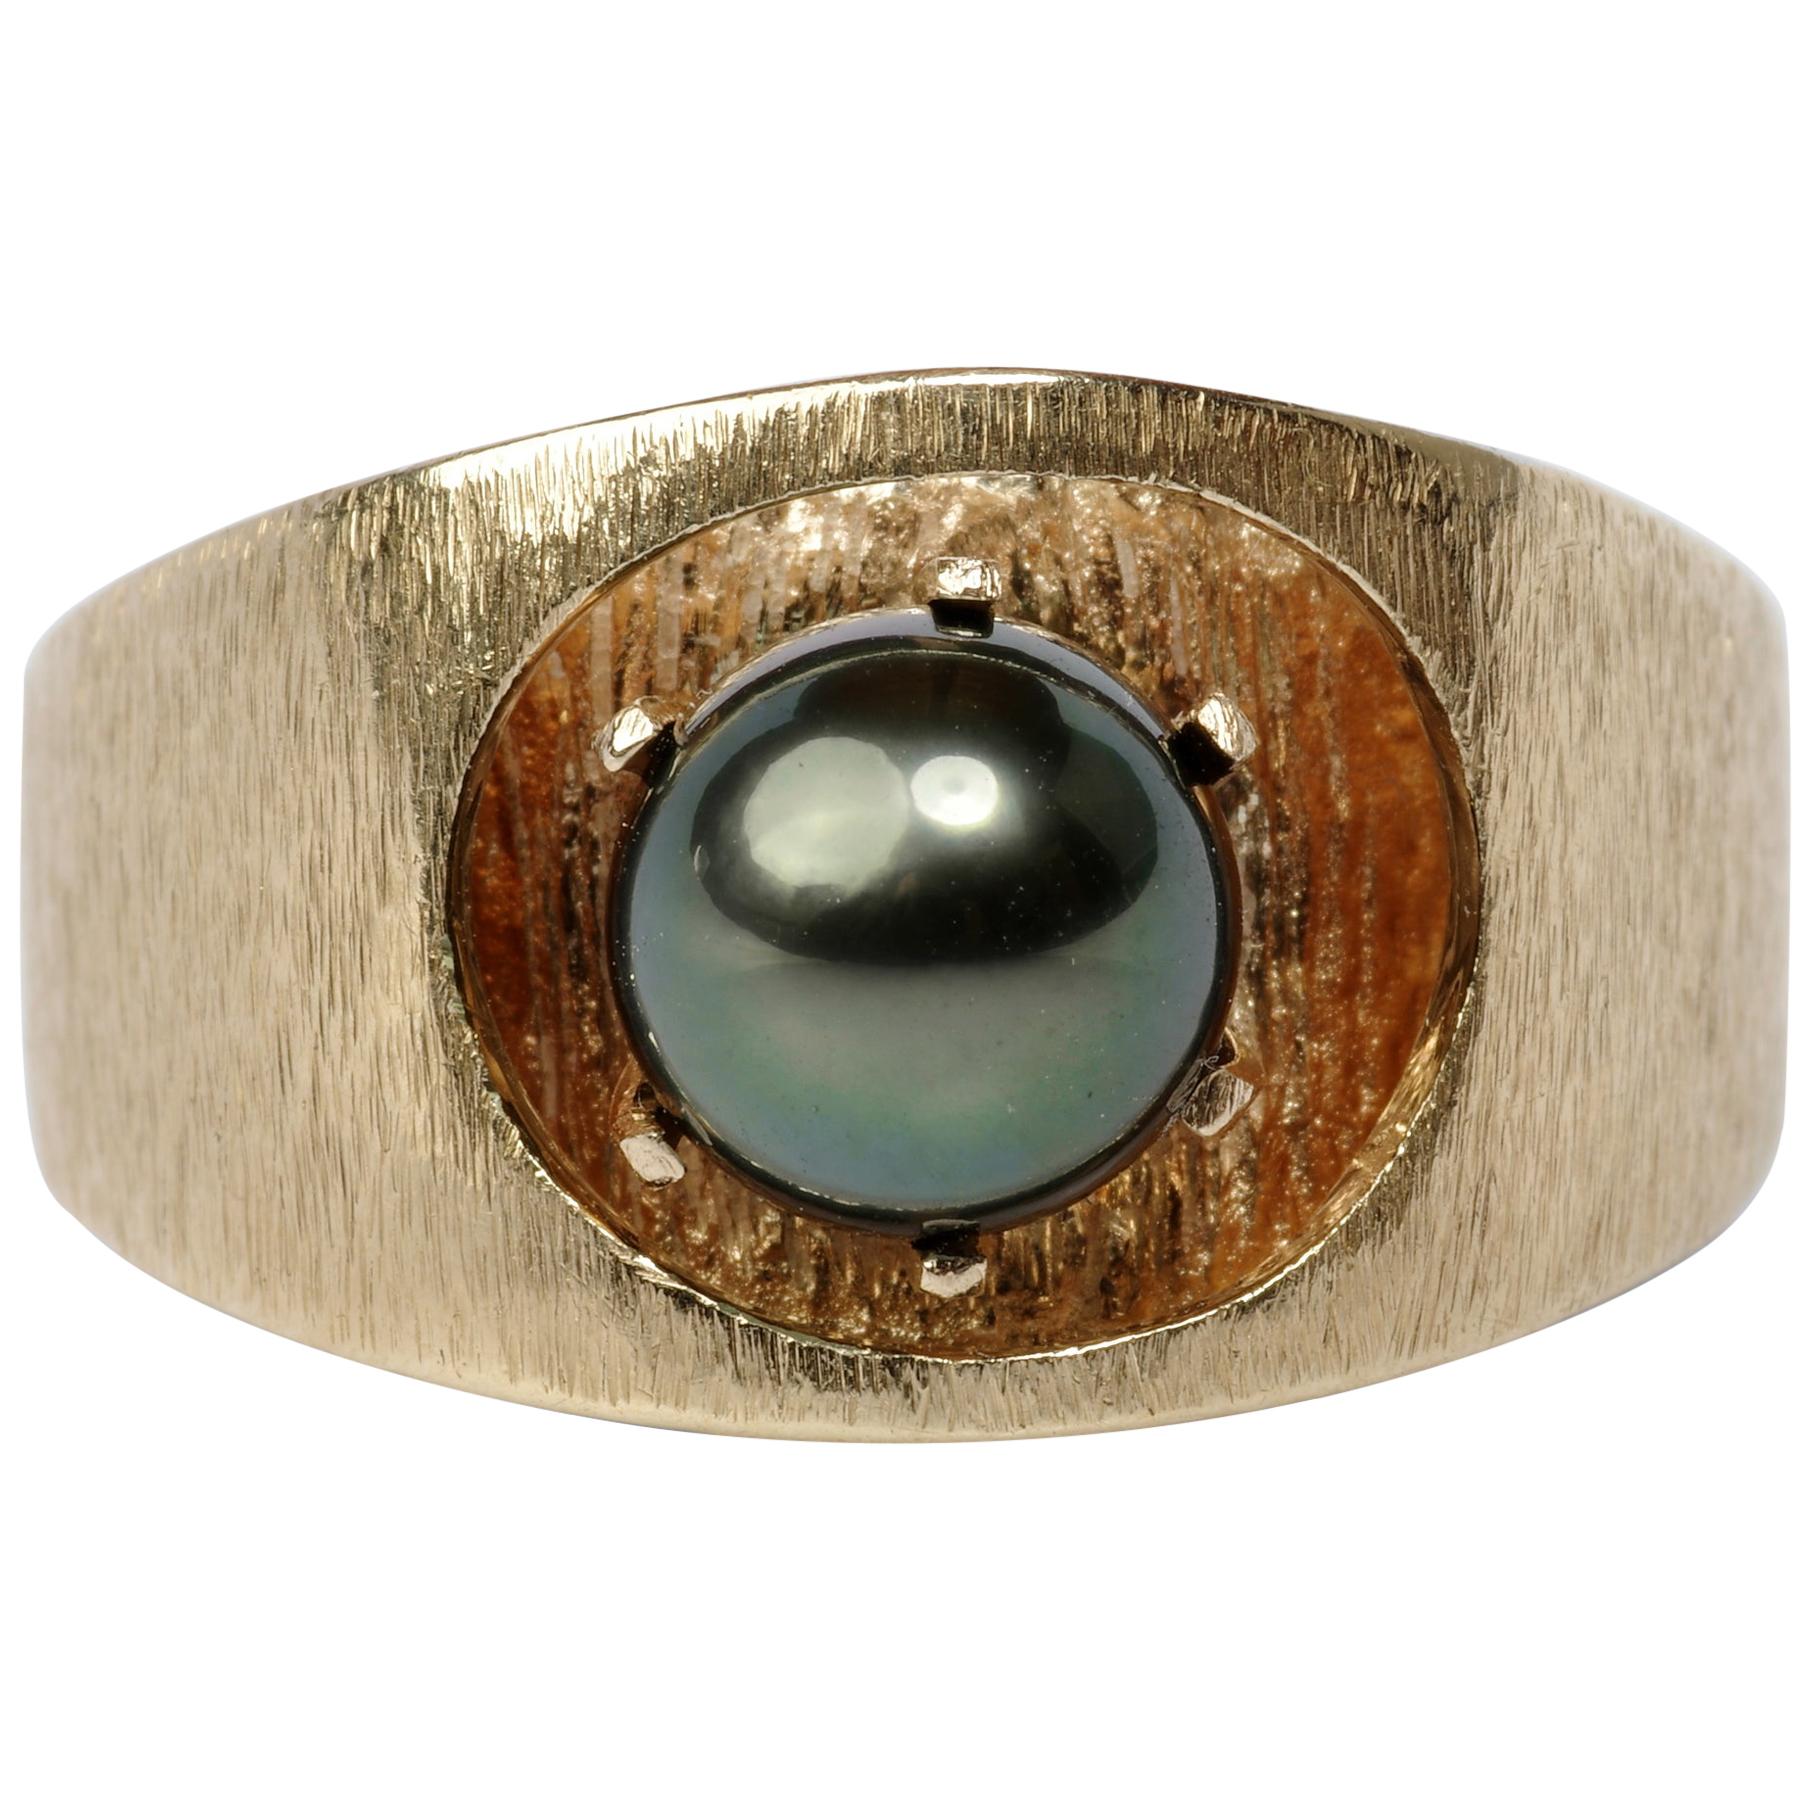 Men's Gold Ring with Tahitian Pearl, circa 1970s